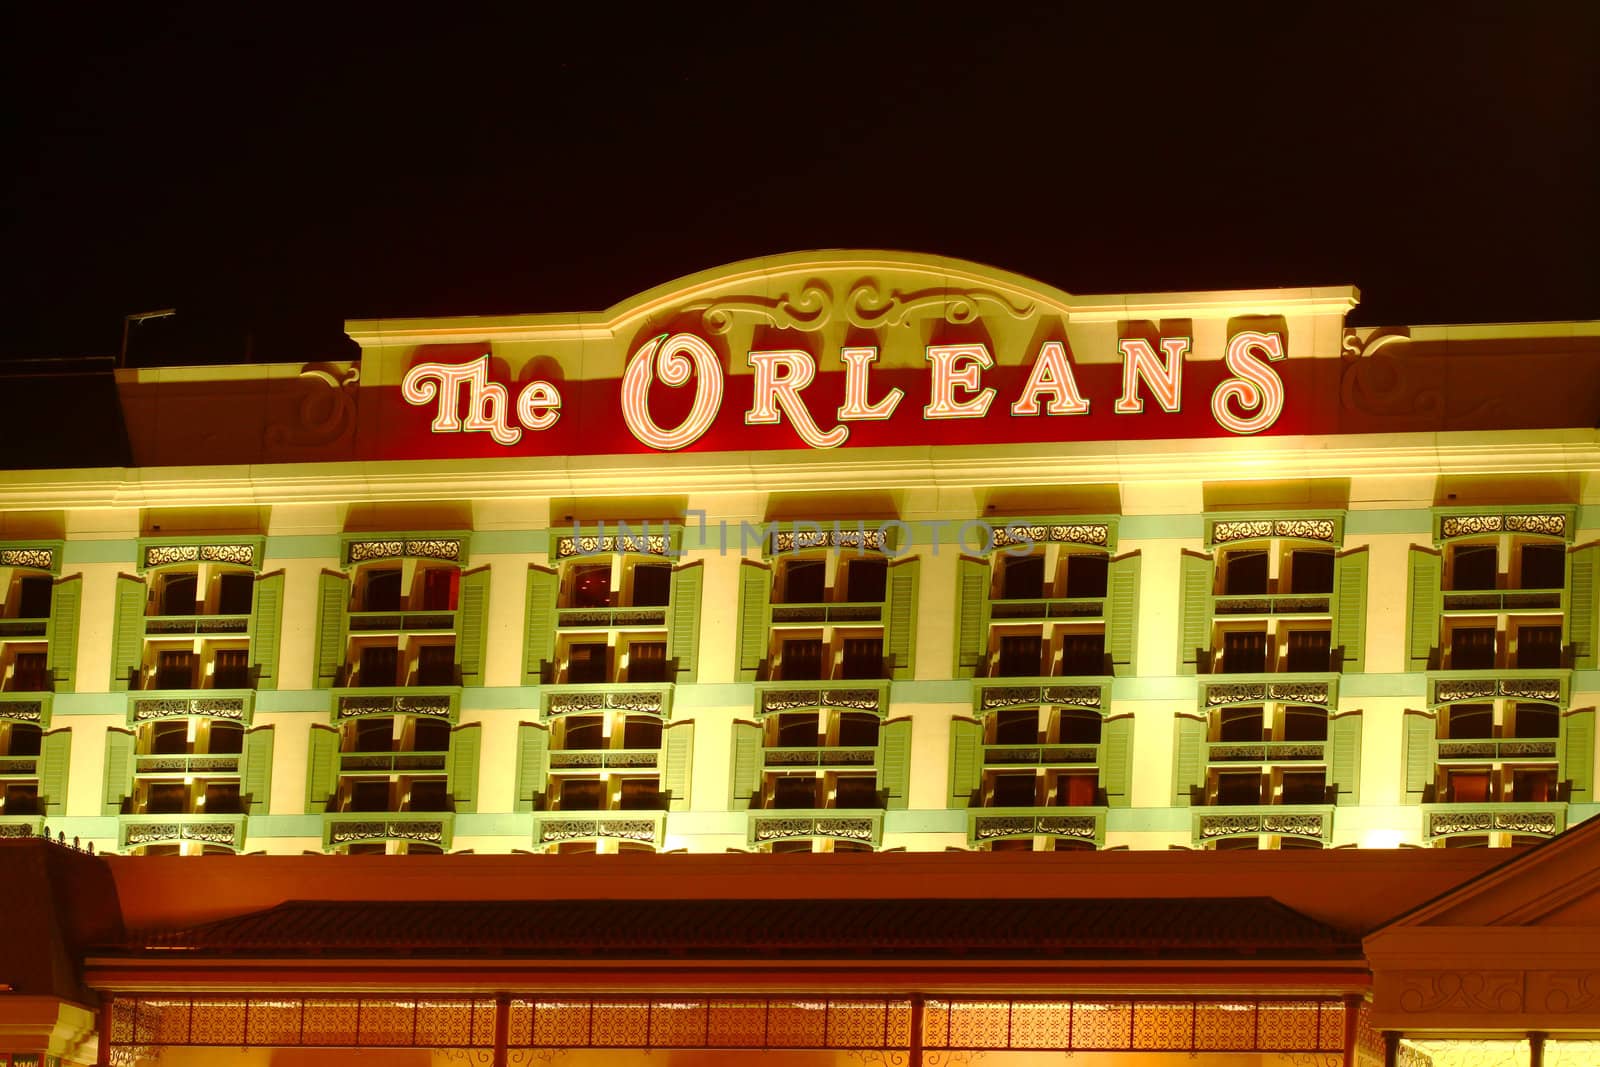 Las Vegas, USA - November 30, 2011: The Orleans Hotel and Casino has a Mardi Gras theme and was opened in Las Vegas in 1996.